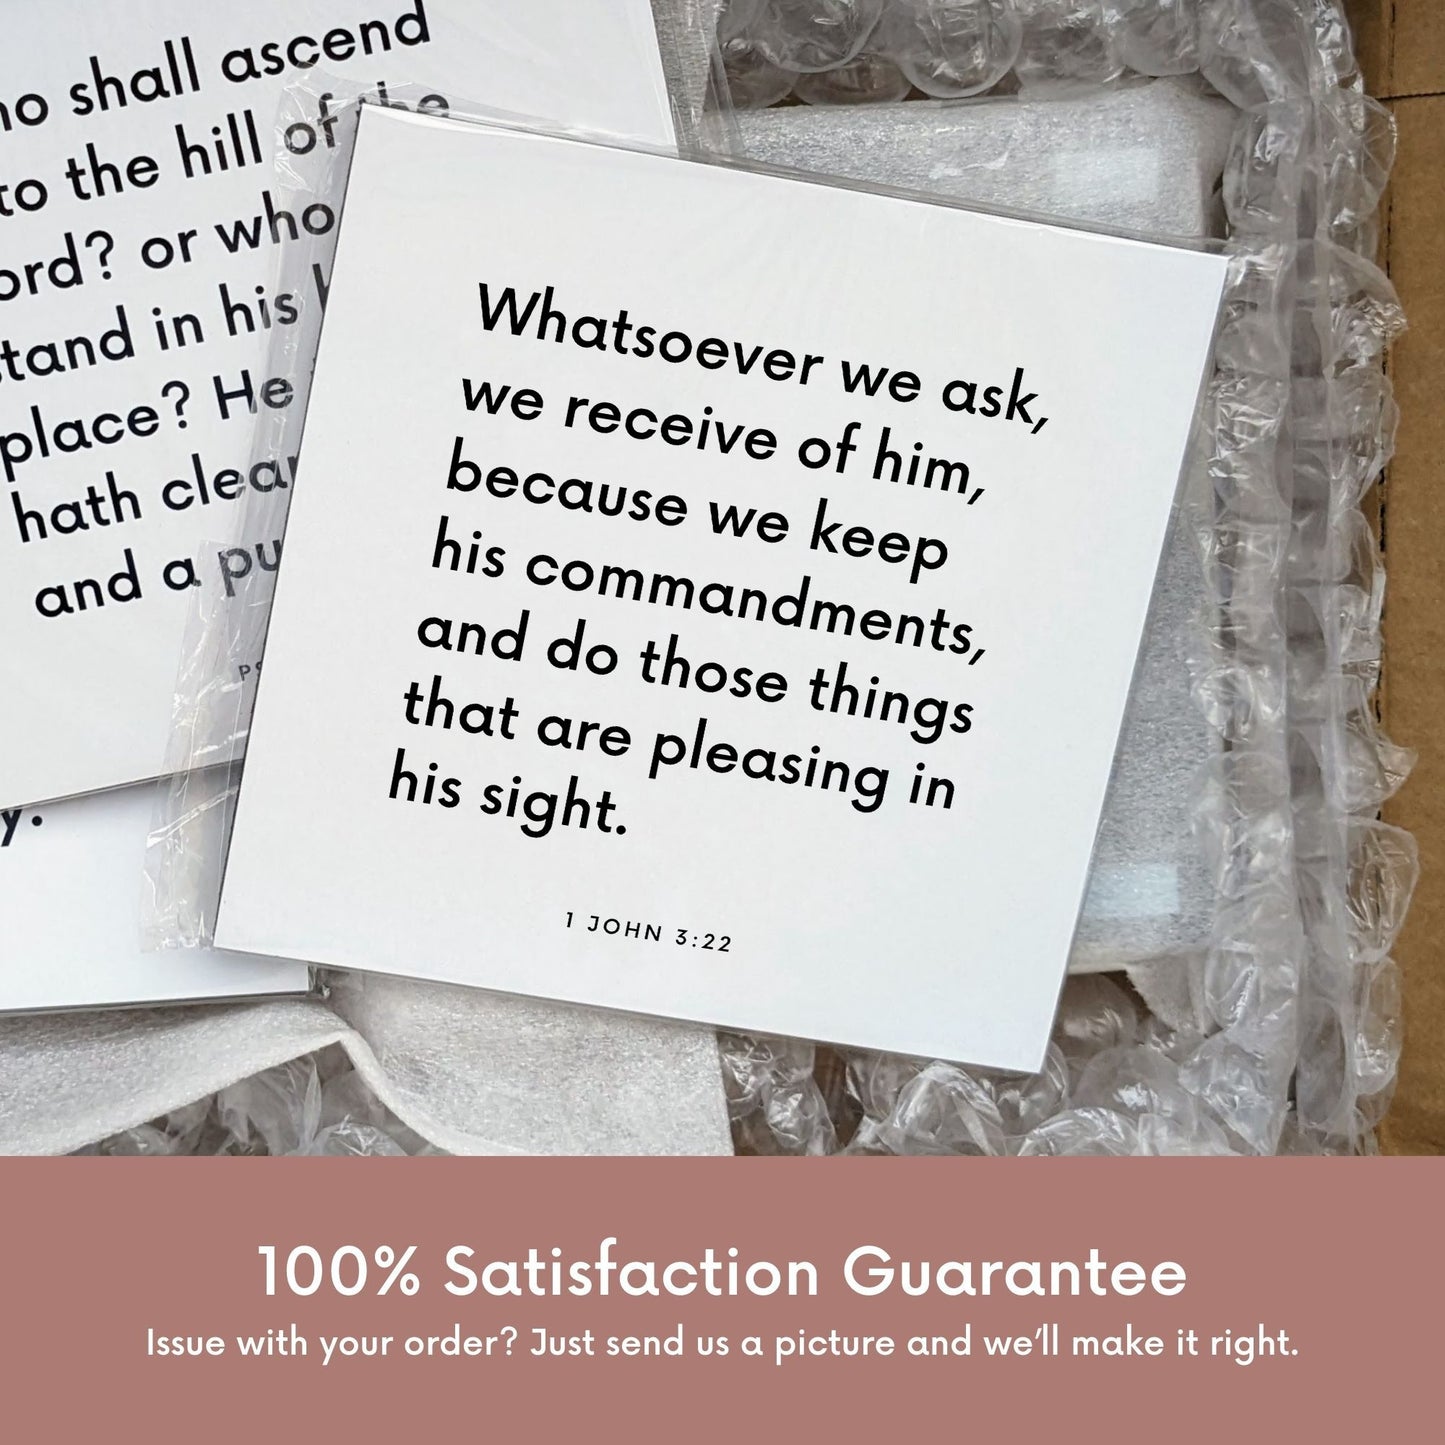 Shipping materials for scripture tile of 1 John 3:22 - "Whatsoever we ask, we receive of him"